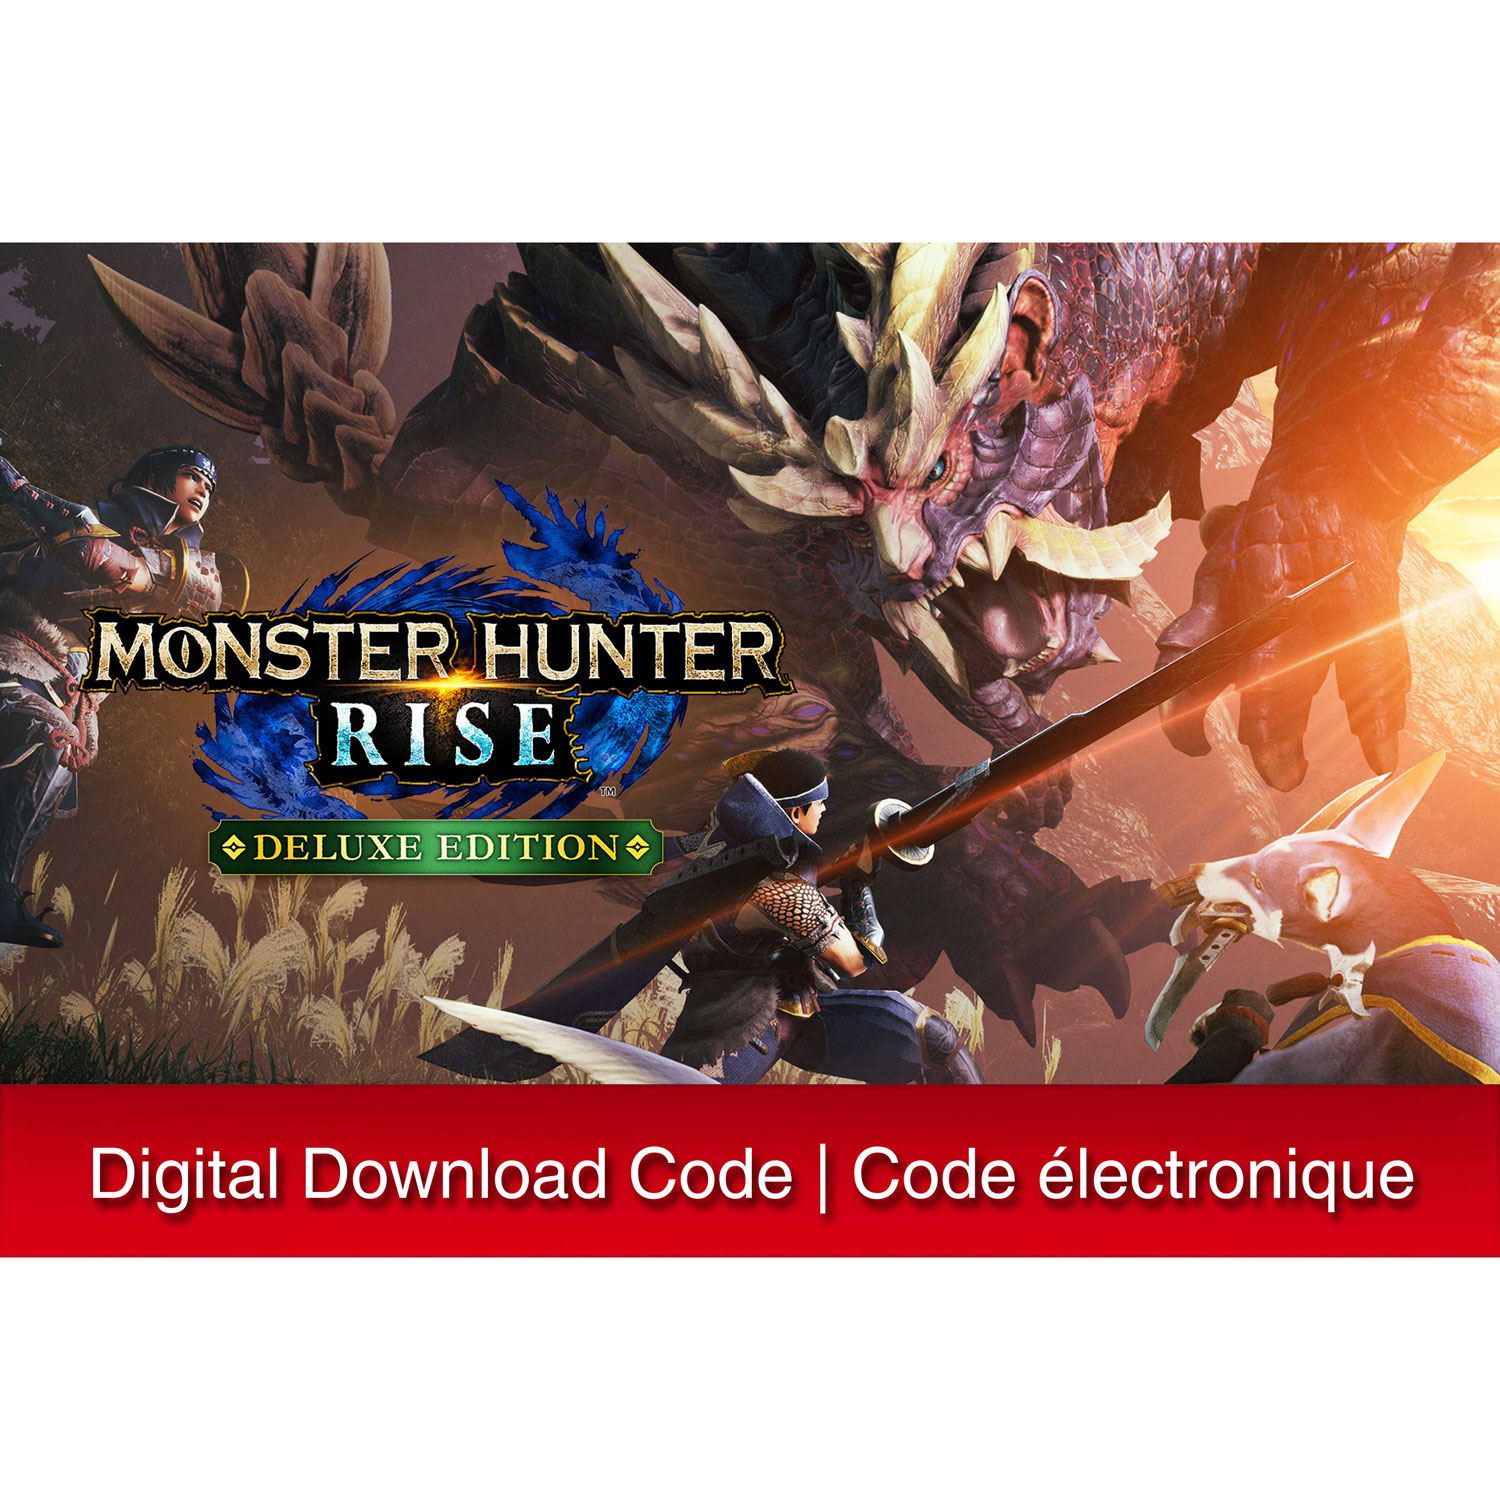 Monster Hunter Rise Deluxe Edition (Switch) - Digital Download